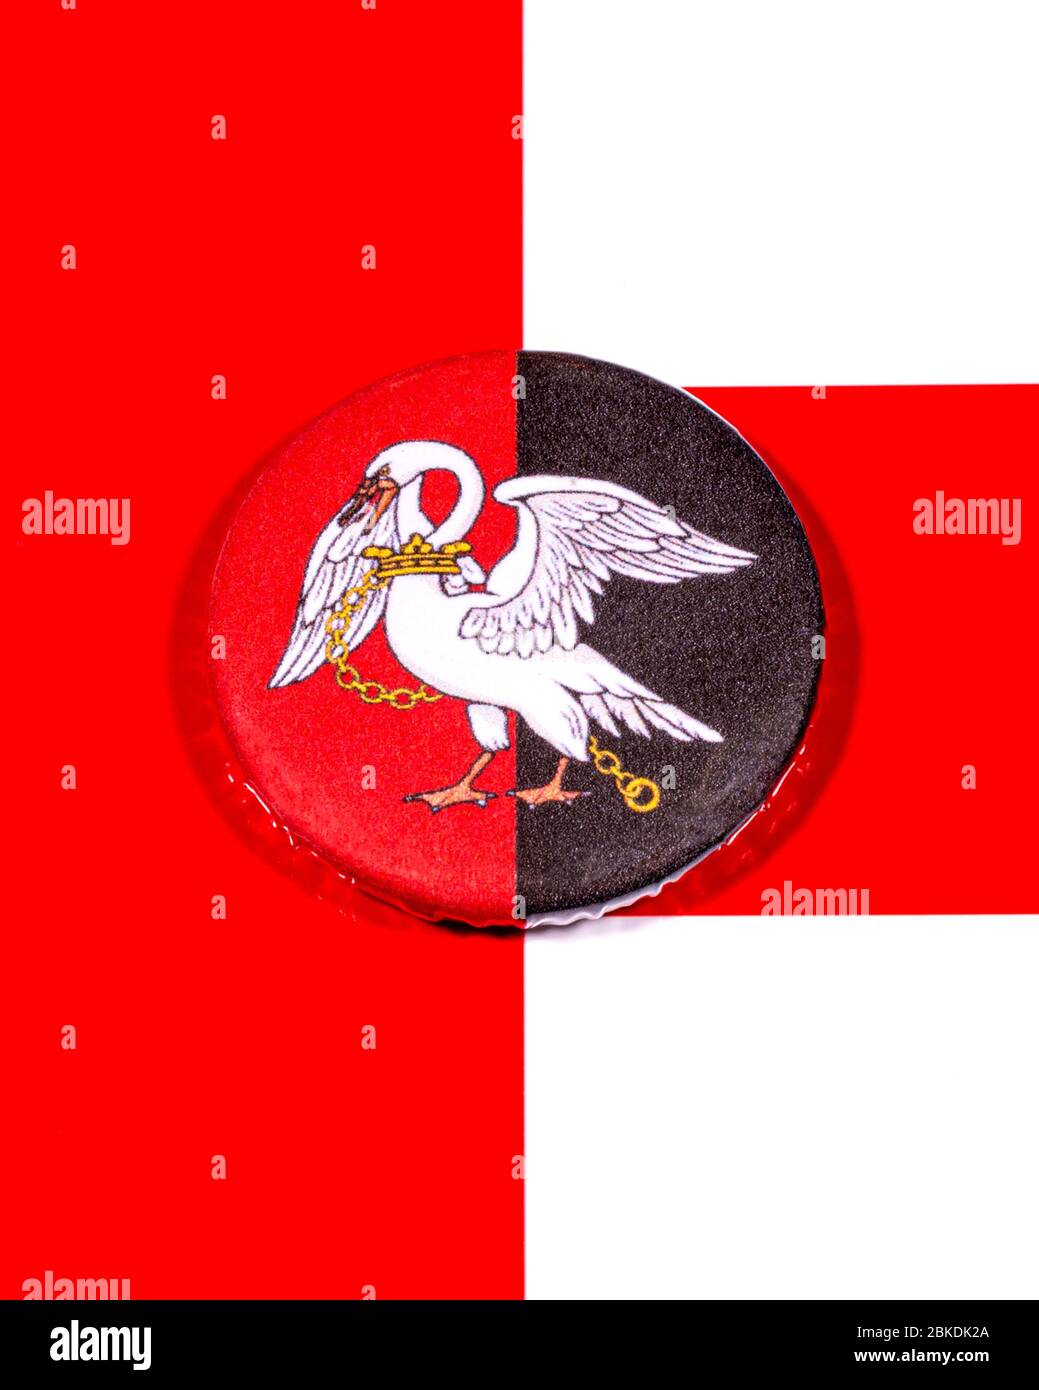 A badge portraying the flag of the English county of Buckinghamshire pictured over the England flag. Stock Photo